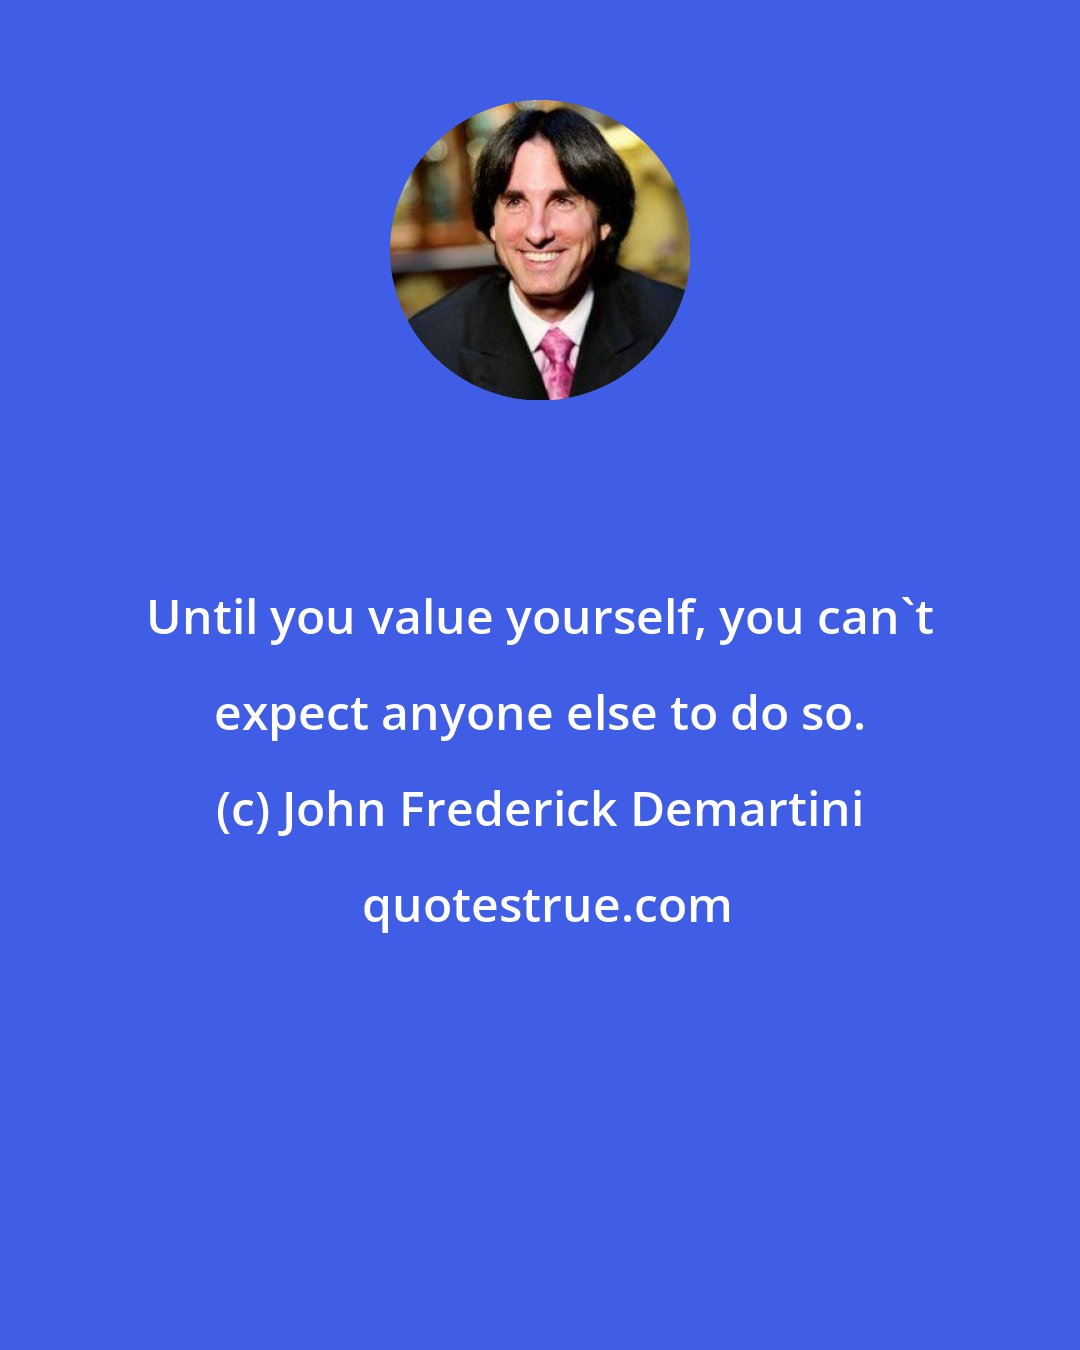 John Frederick Demartini: Until you value yourself, you can't expect anyone else to do so.